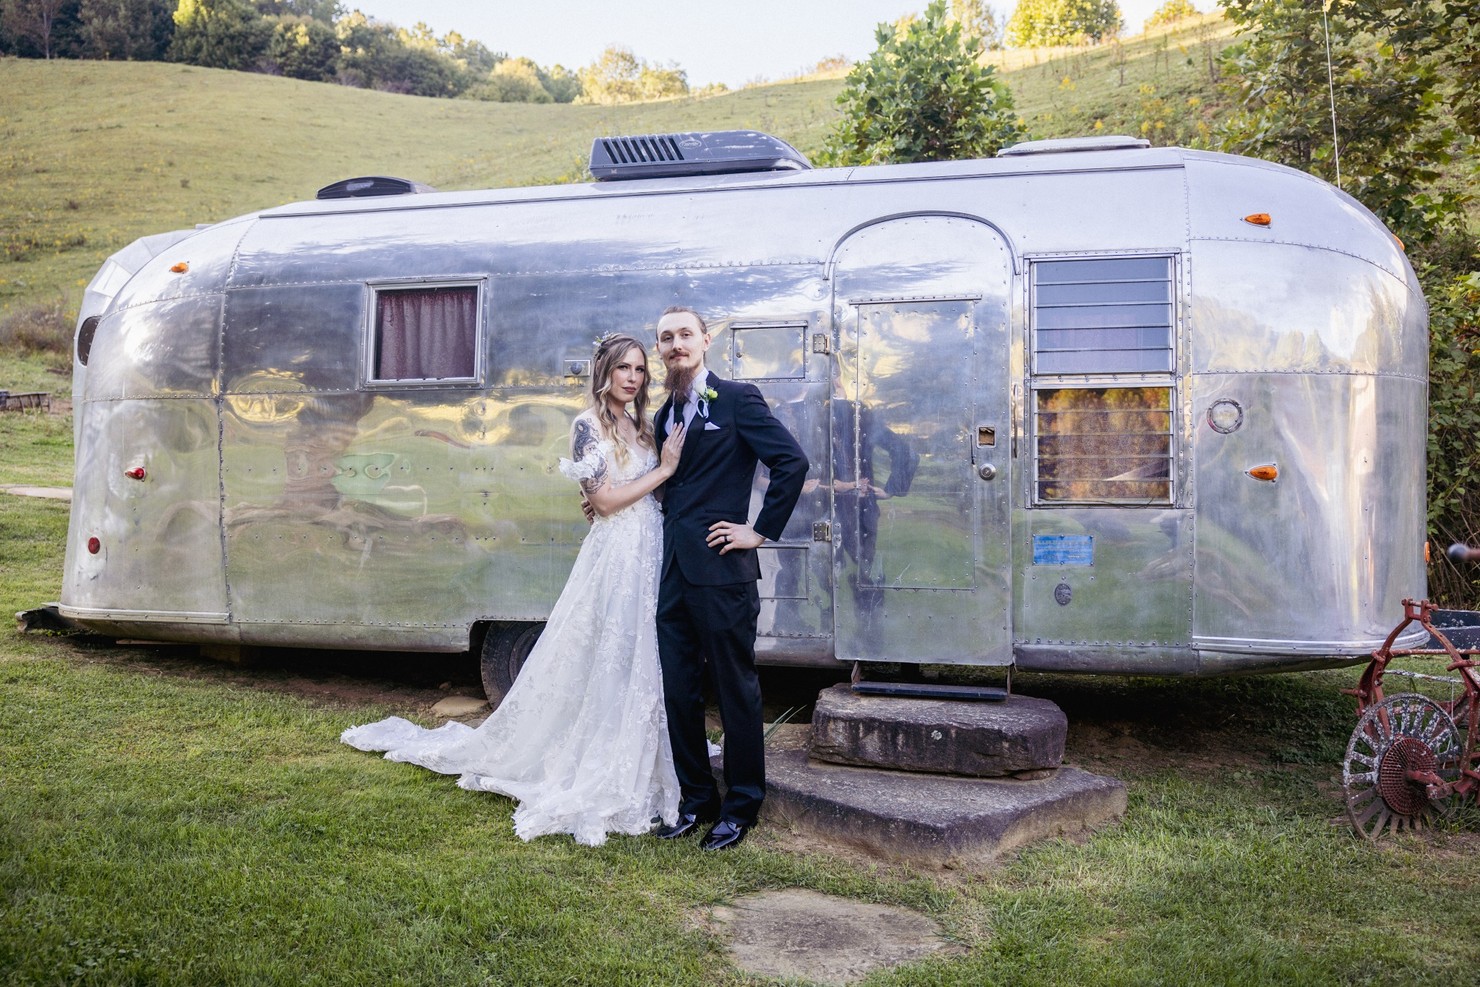 A bride and groom in wedding attire posing in front of vintage Airstream.